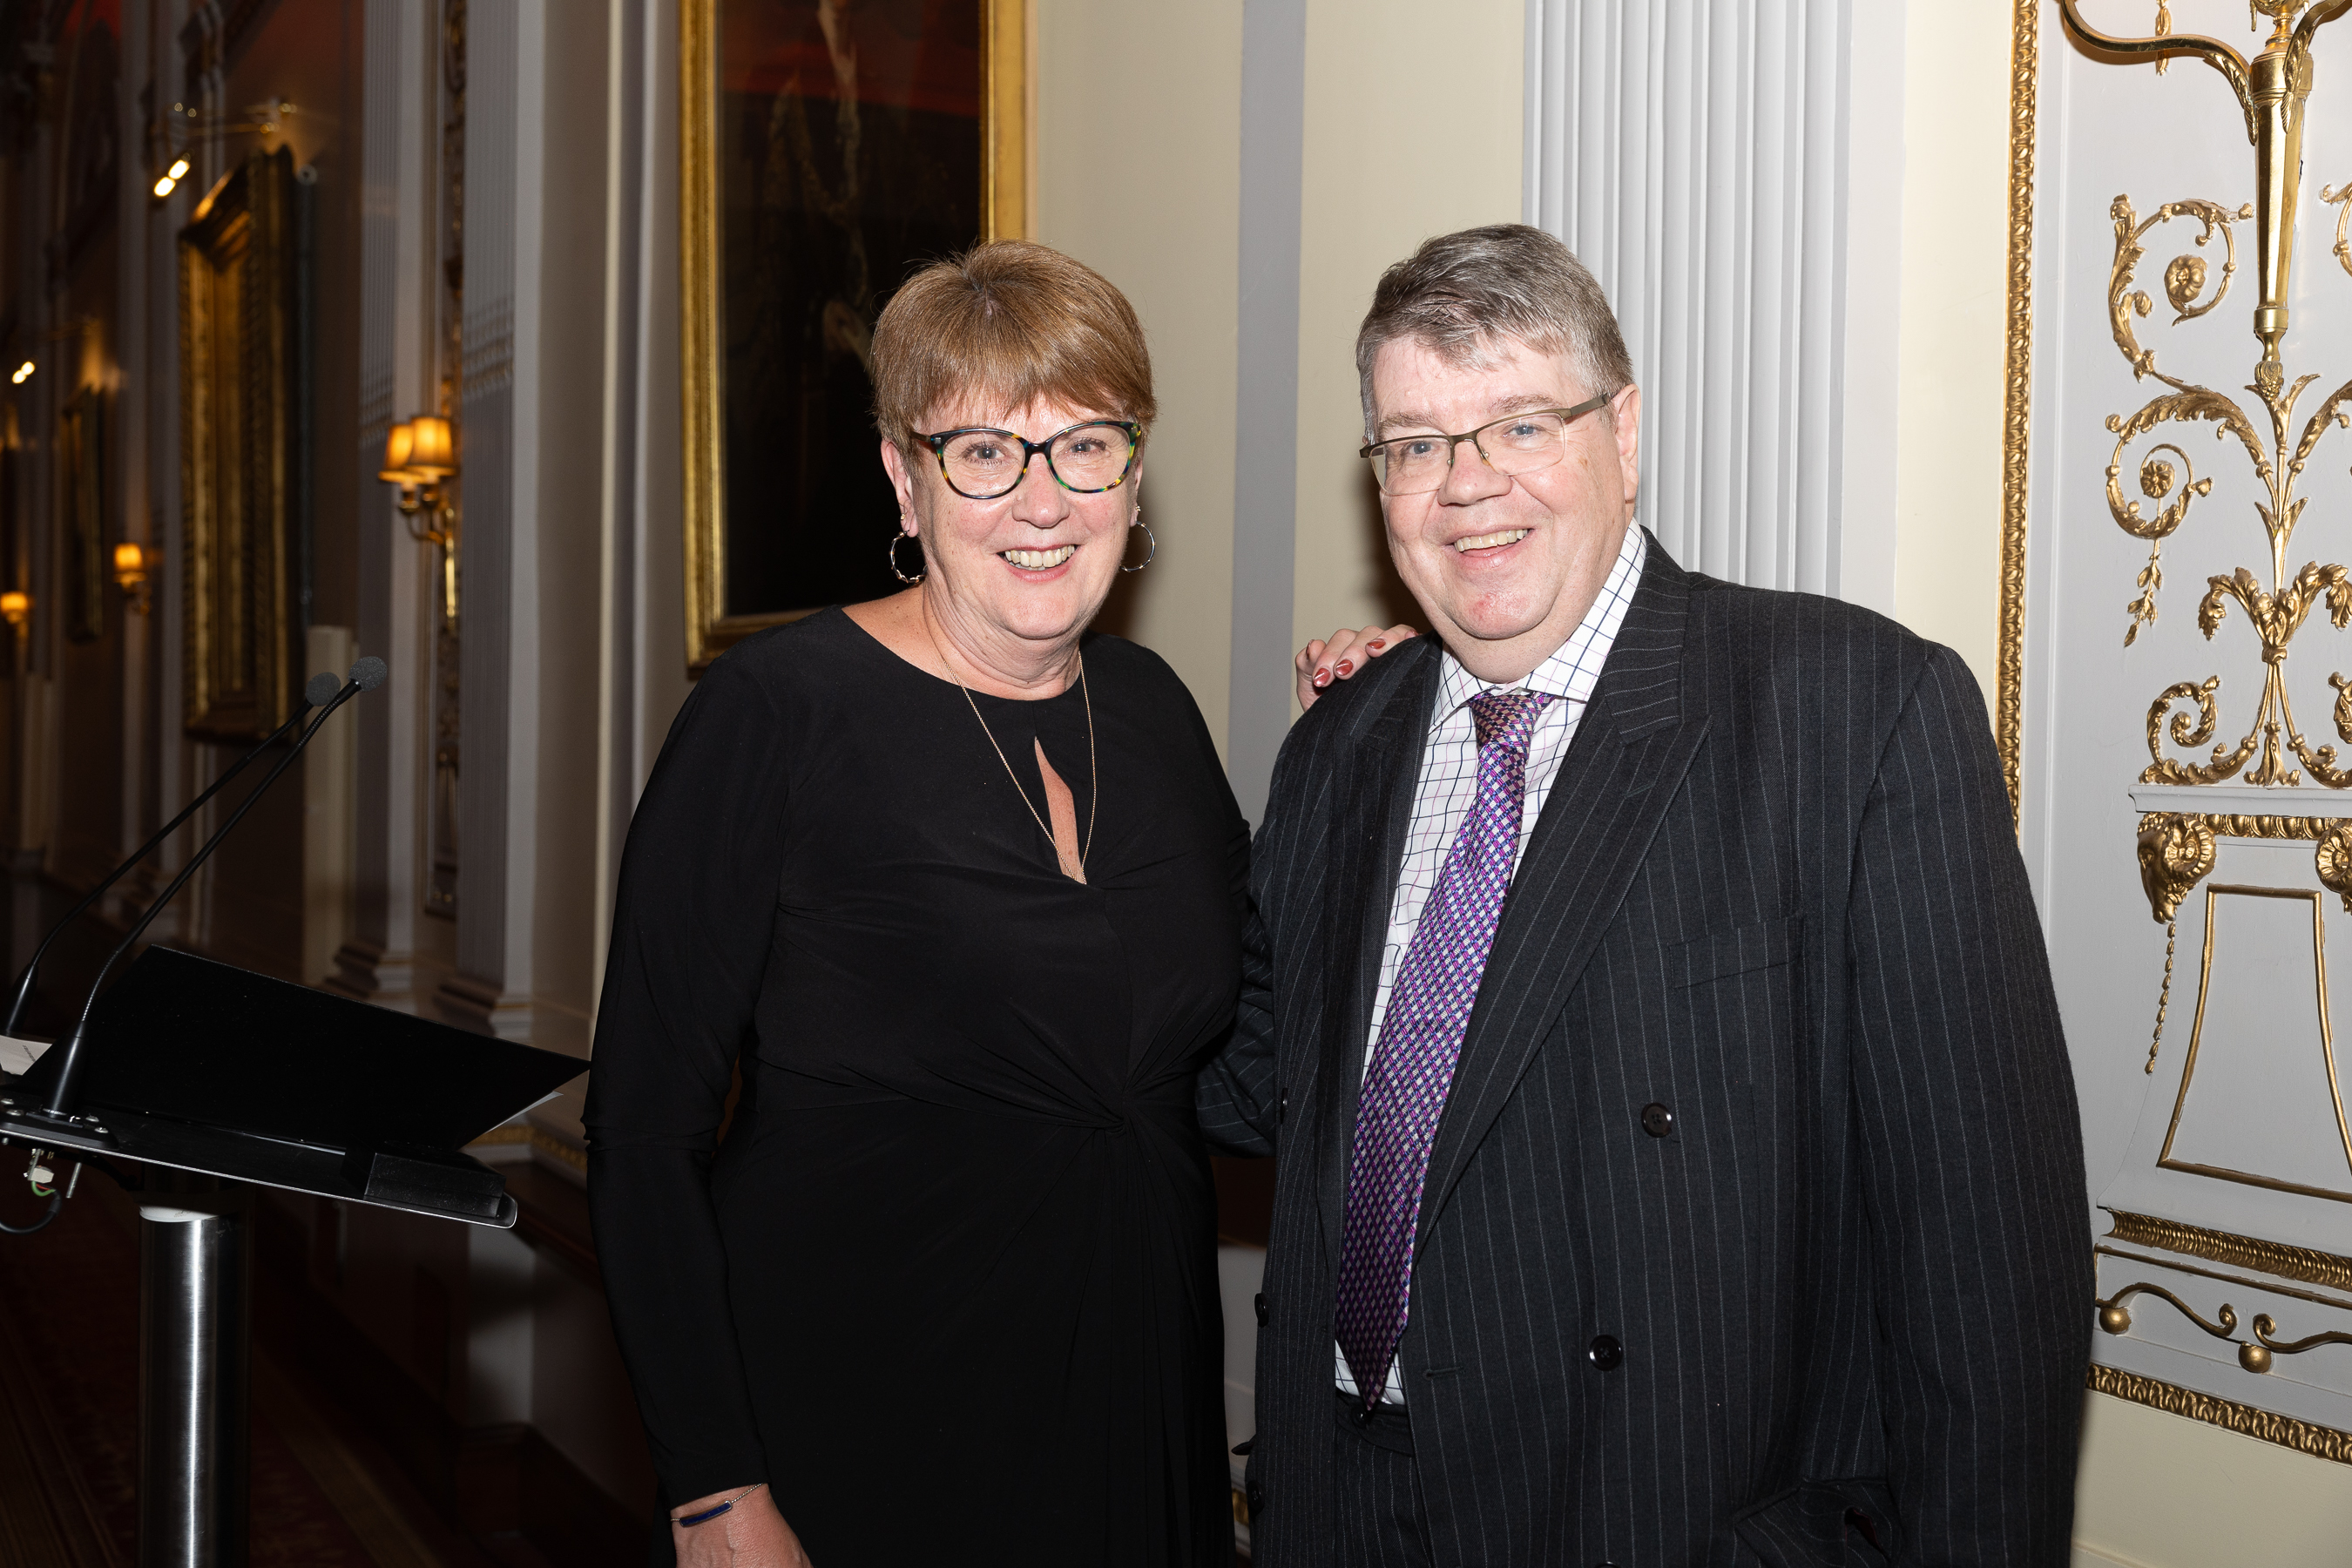 Dame Judith Hackitt and Lord Justice Coulson